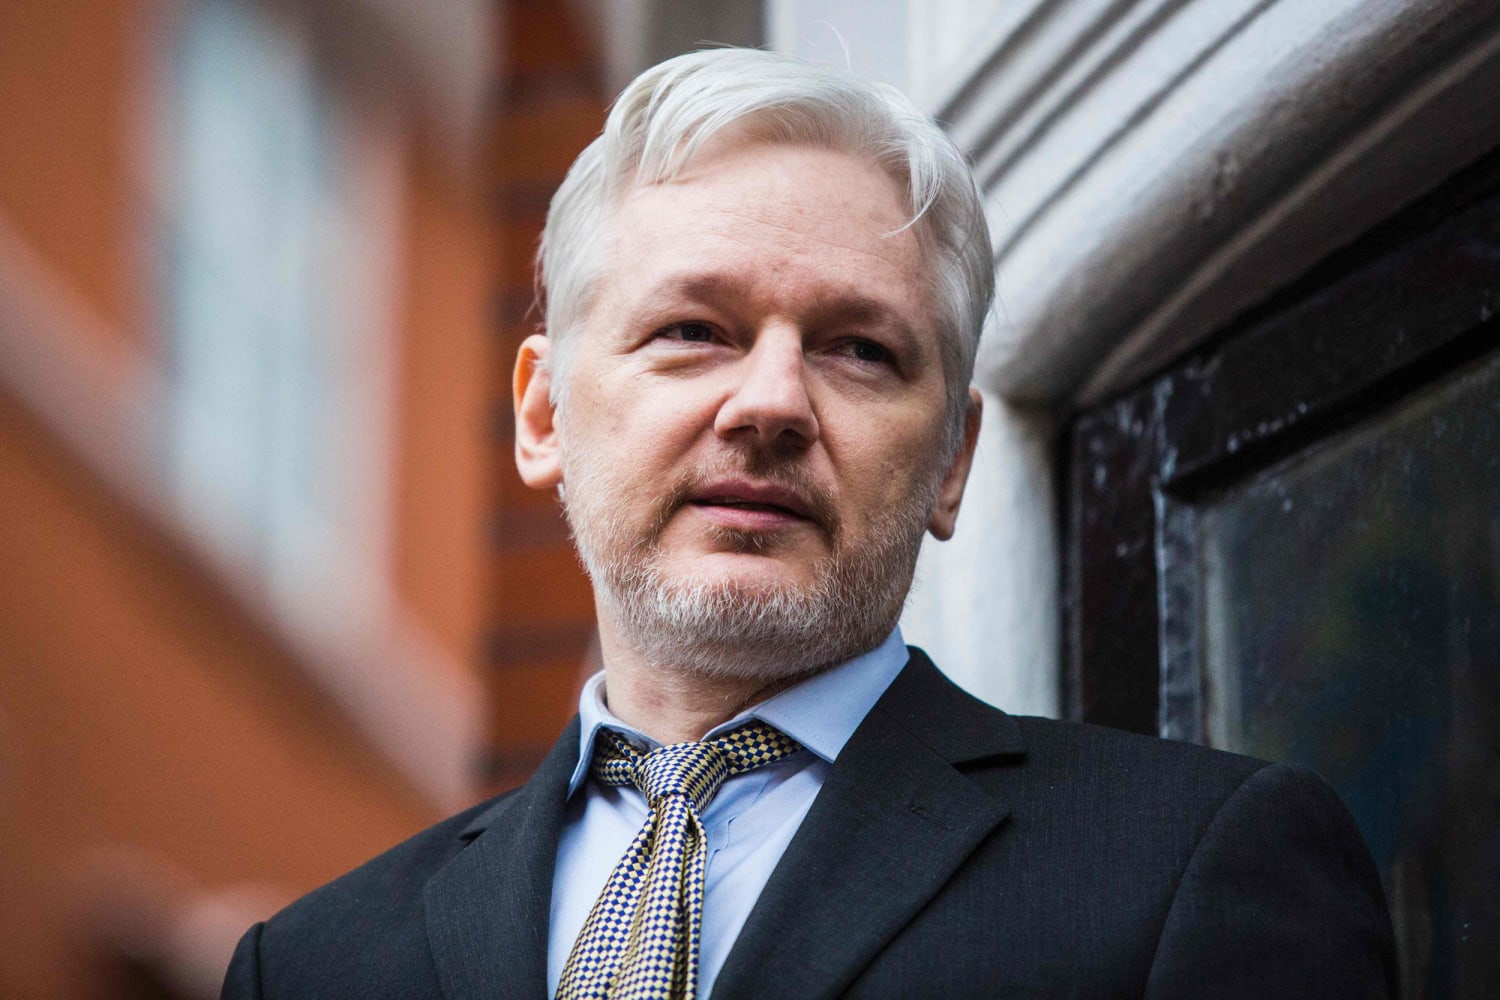 WikiLeaks founder Julian Assange could be extradited to the U.S. after U.K.  ruling